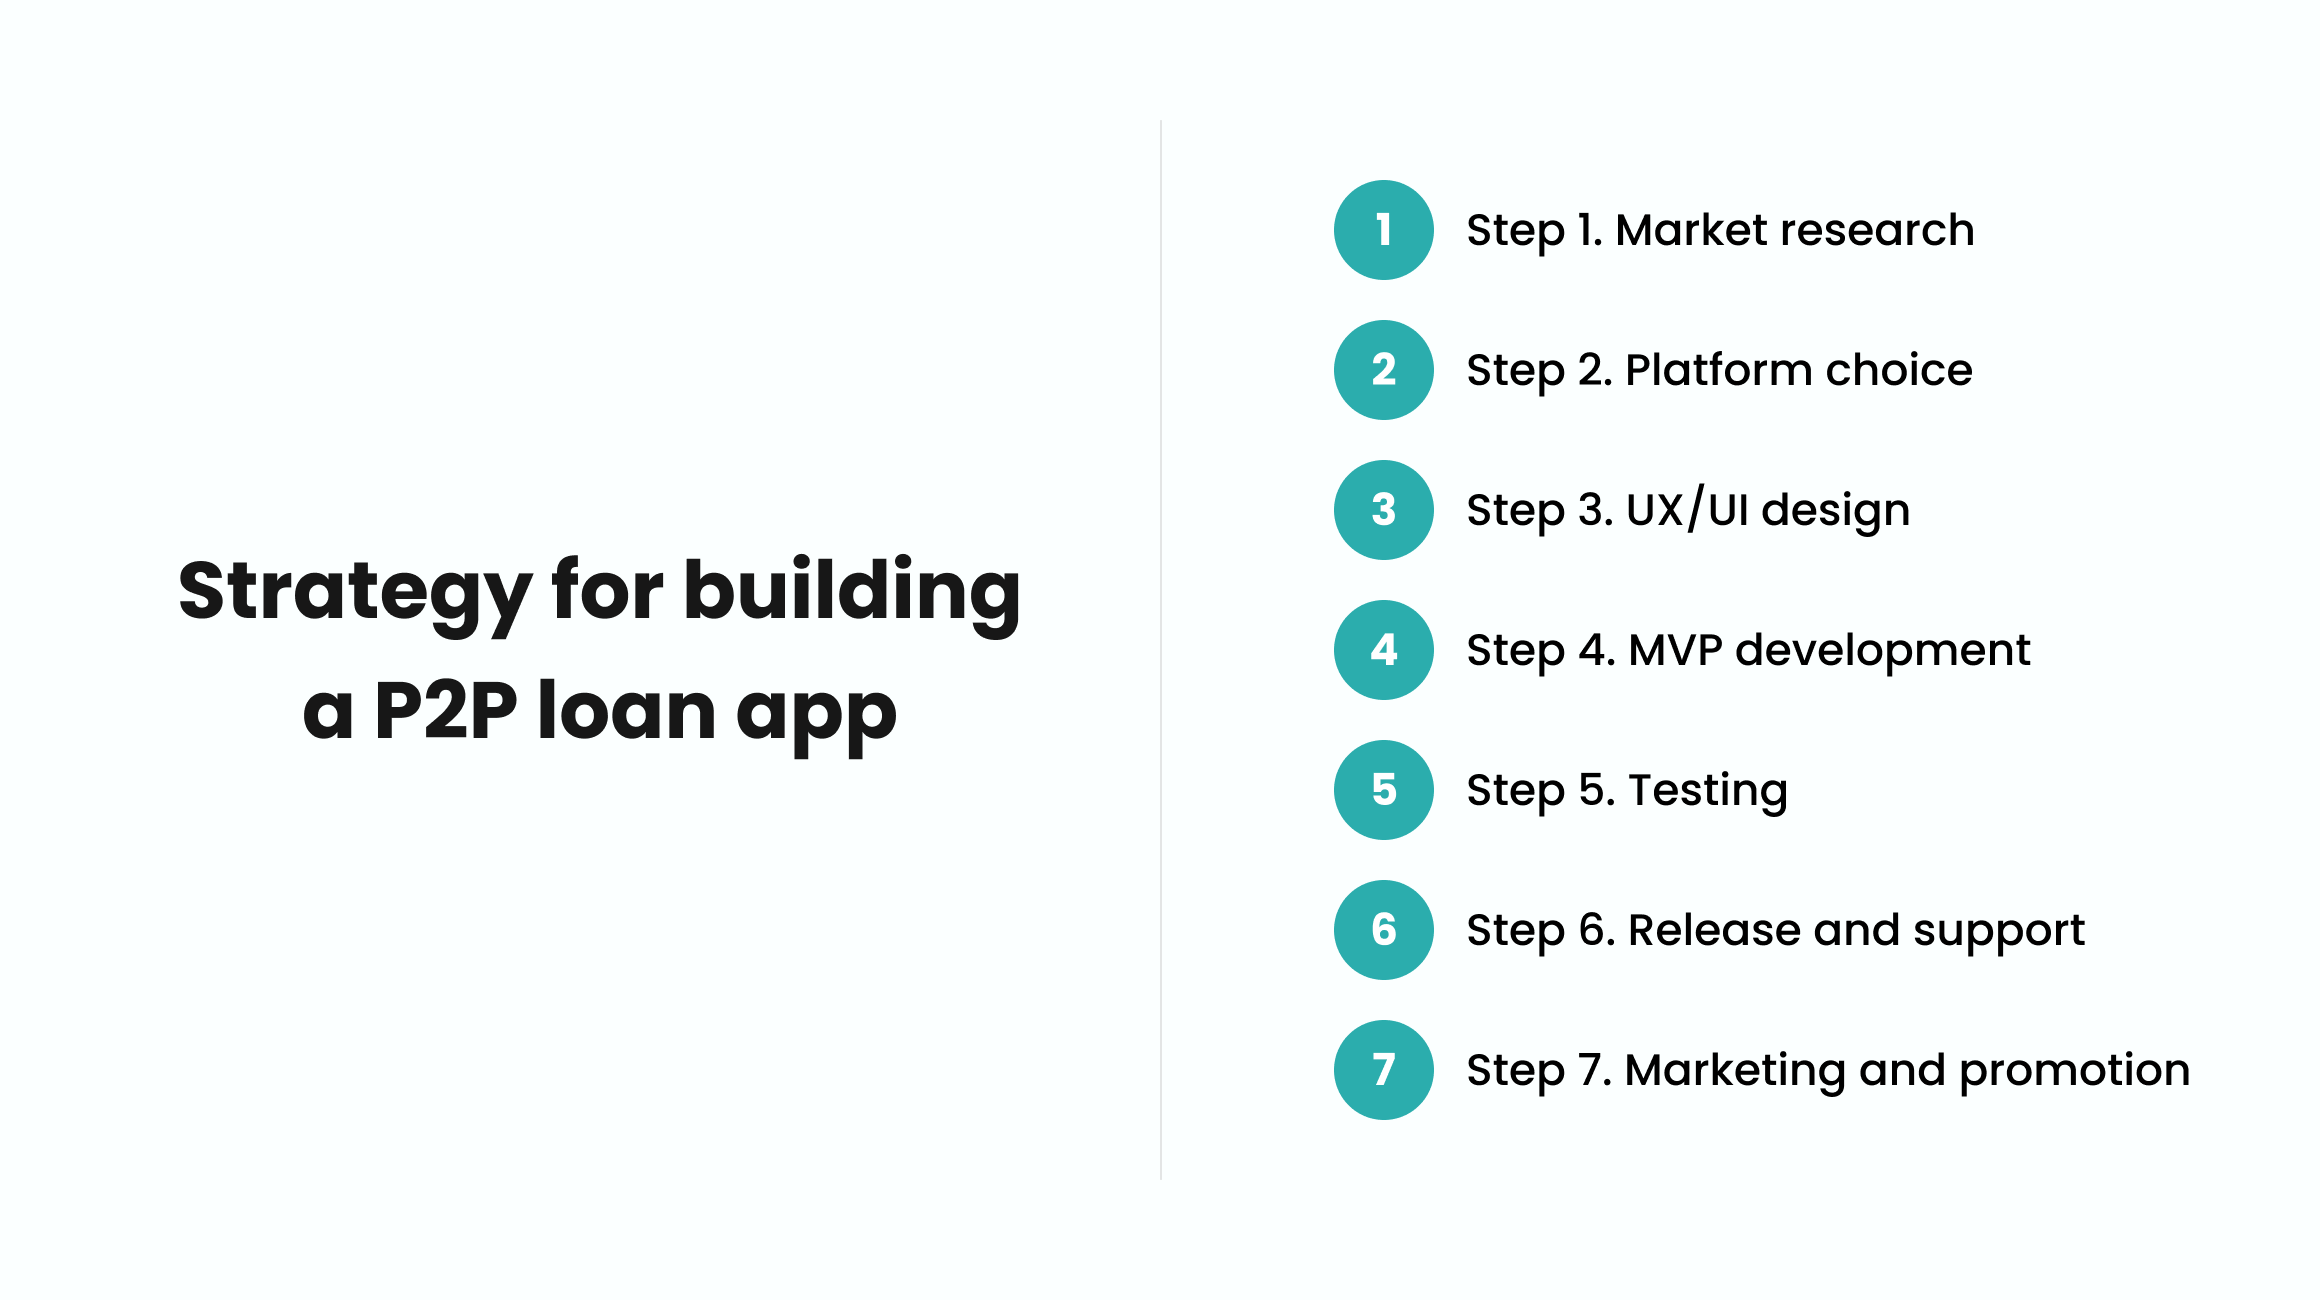 Strategy for building a P2P loan app